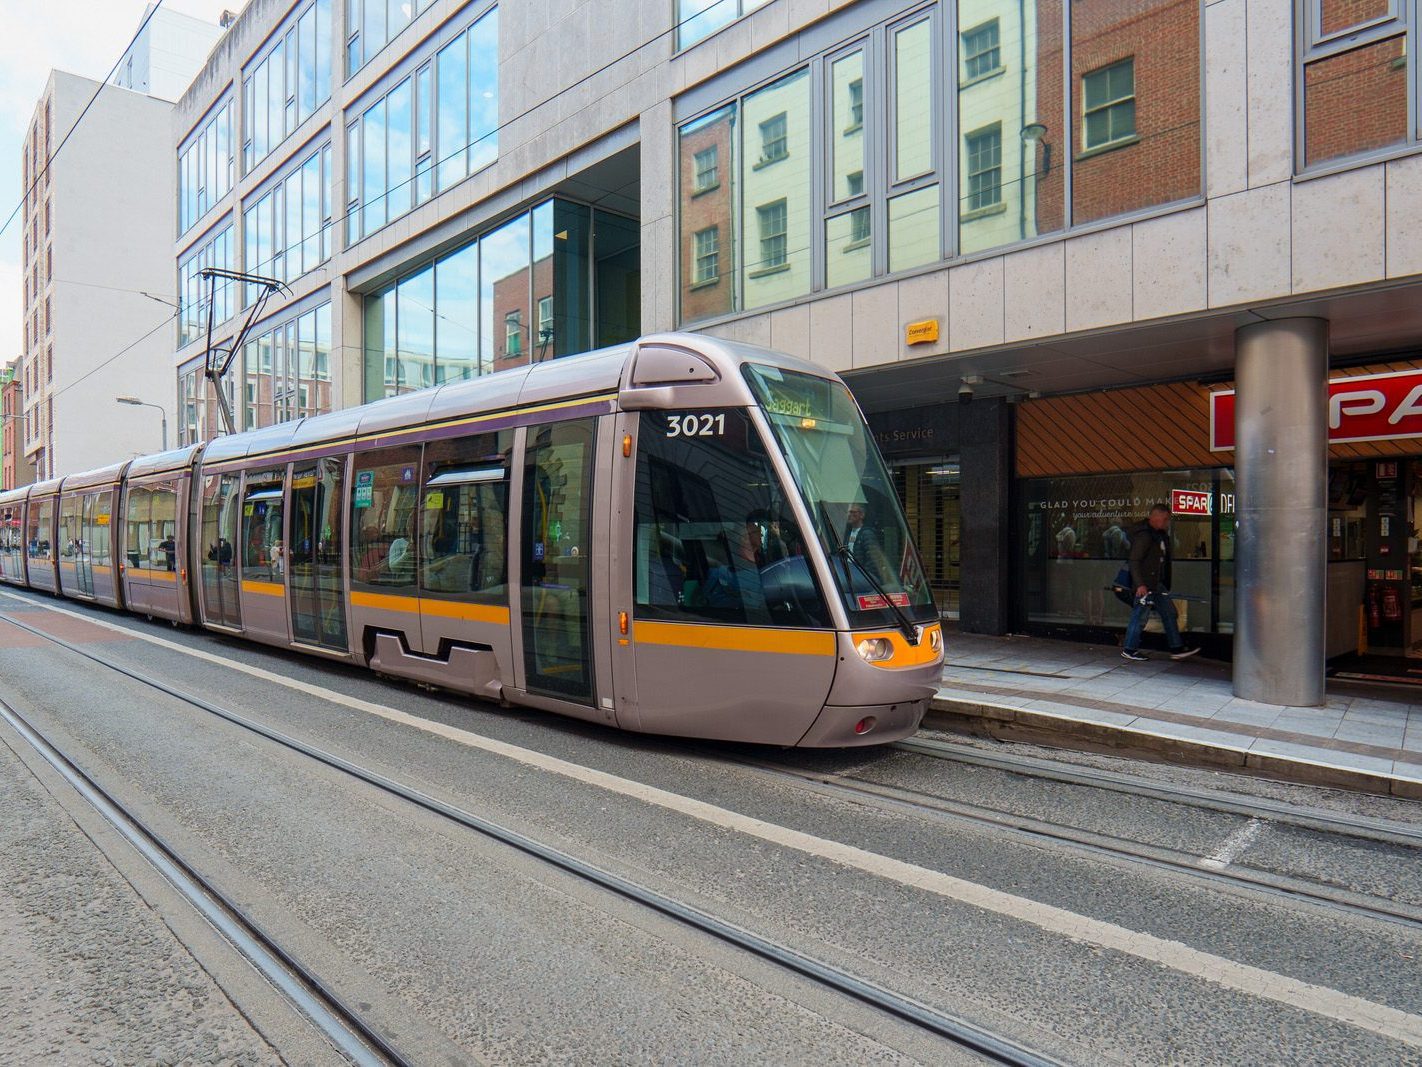 THE LUAS TRAM STOP [KNOWN AS JERVIS EVEN THOUGH IT IS ON UPPER ABBEY STREET] 009